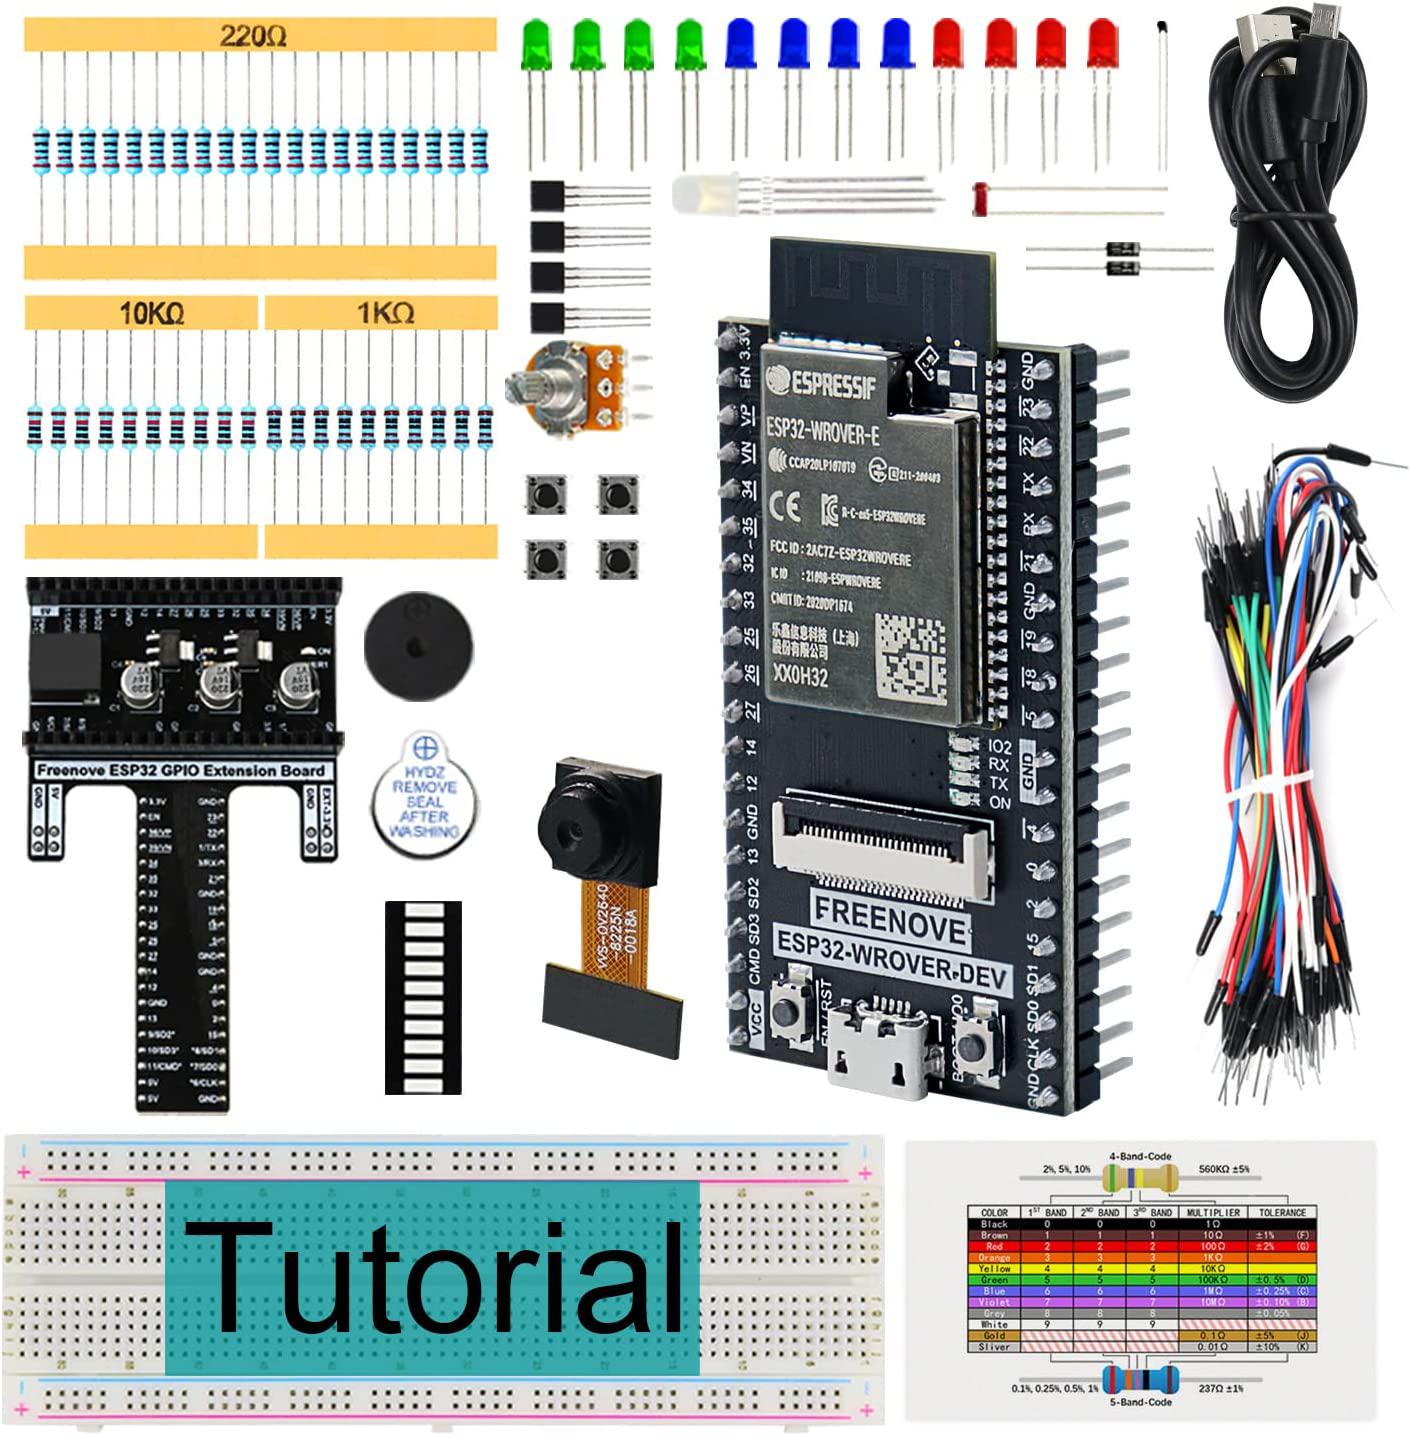 Freenove, Freenove Basic Starter Kit for ESP32-WROVER (Included) (Compatible with Arduino IDE), Onboard Camera Wireless, Python C, 401-Page Detailed Tutorial, 141 Items, 61 Projects